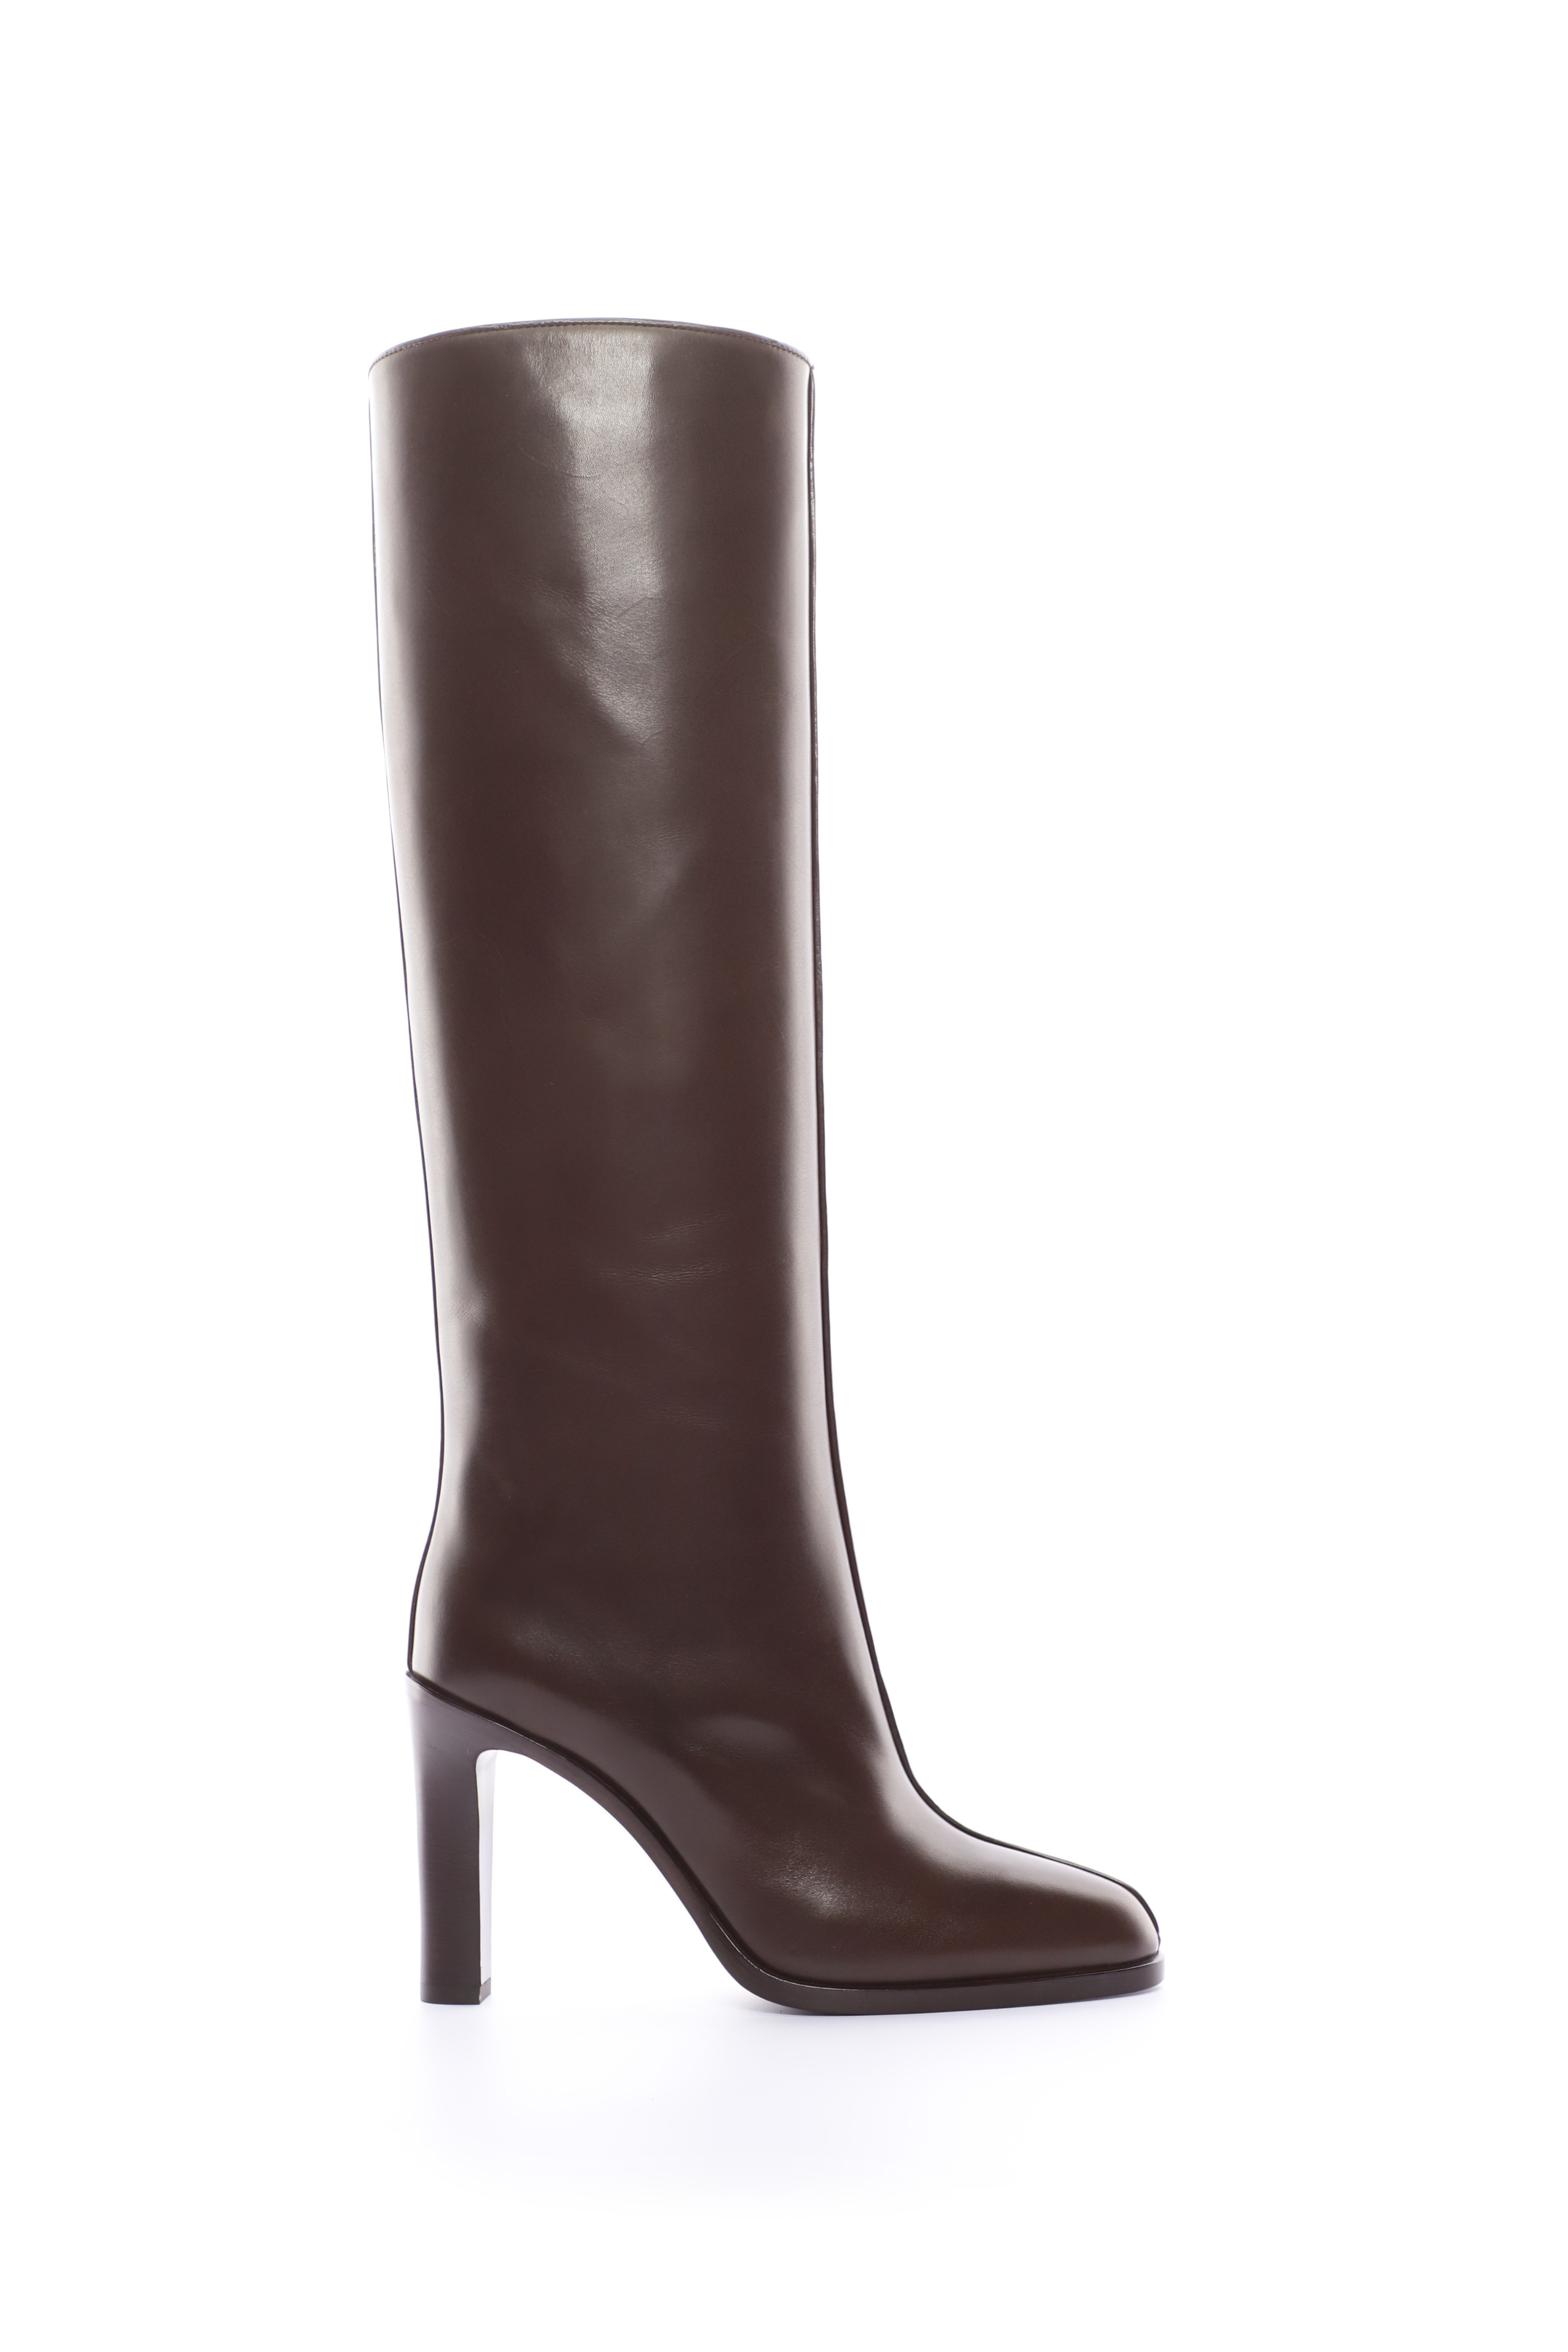 THE ROW Tall Leather Knee High Boots